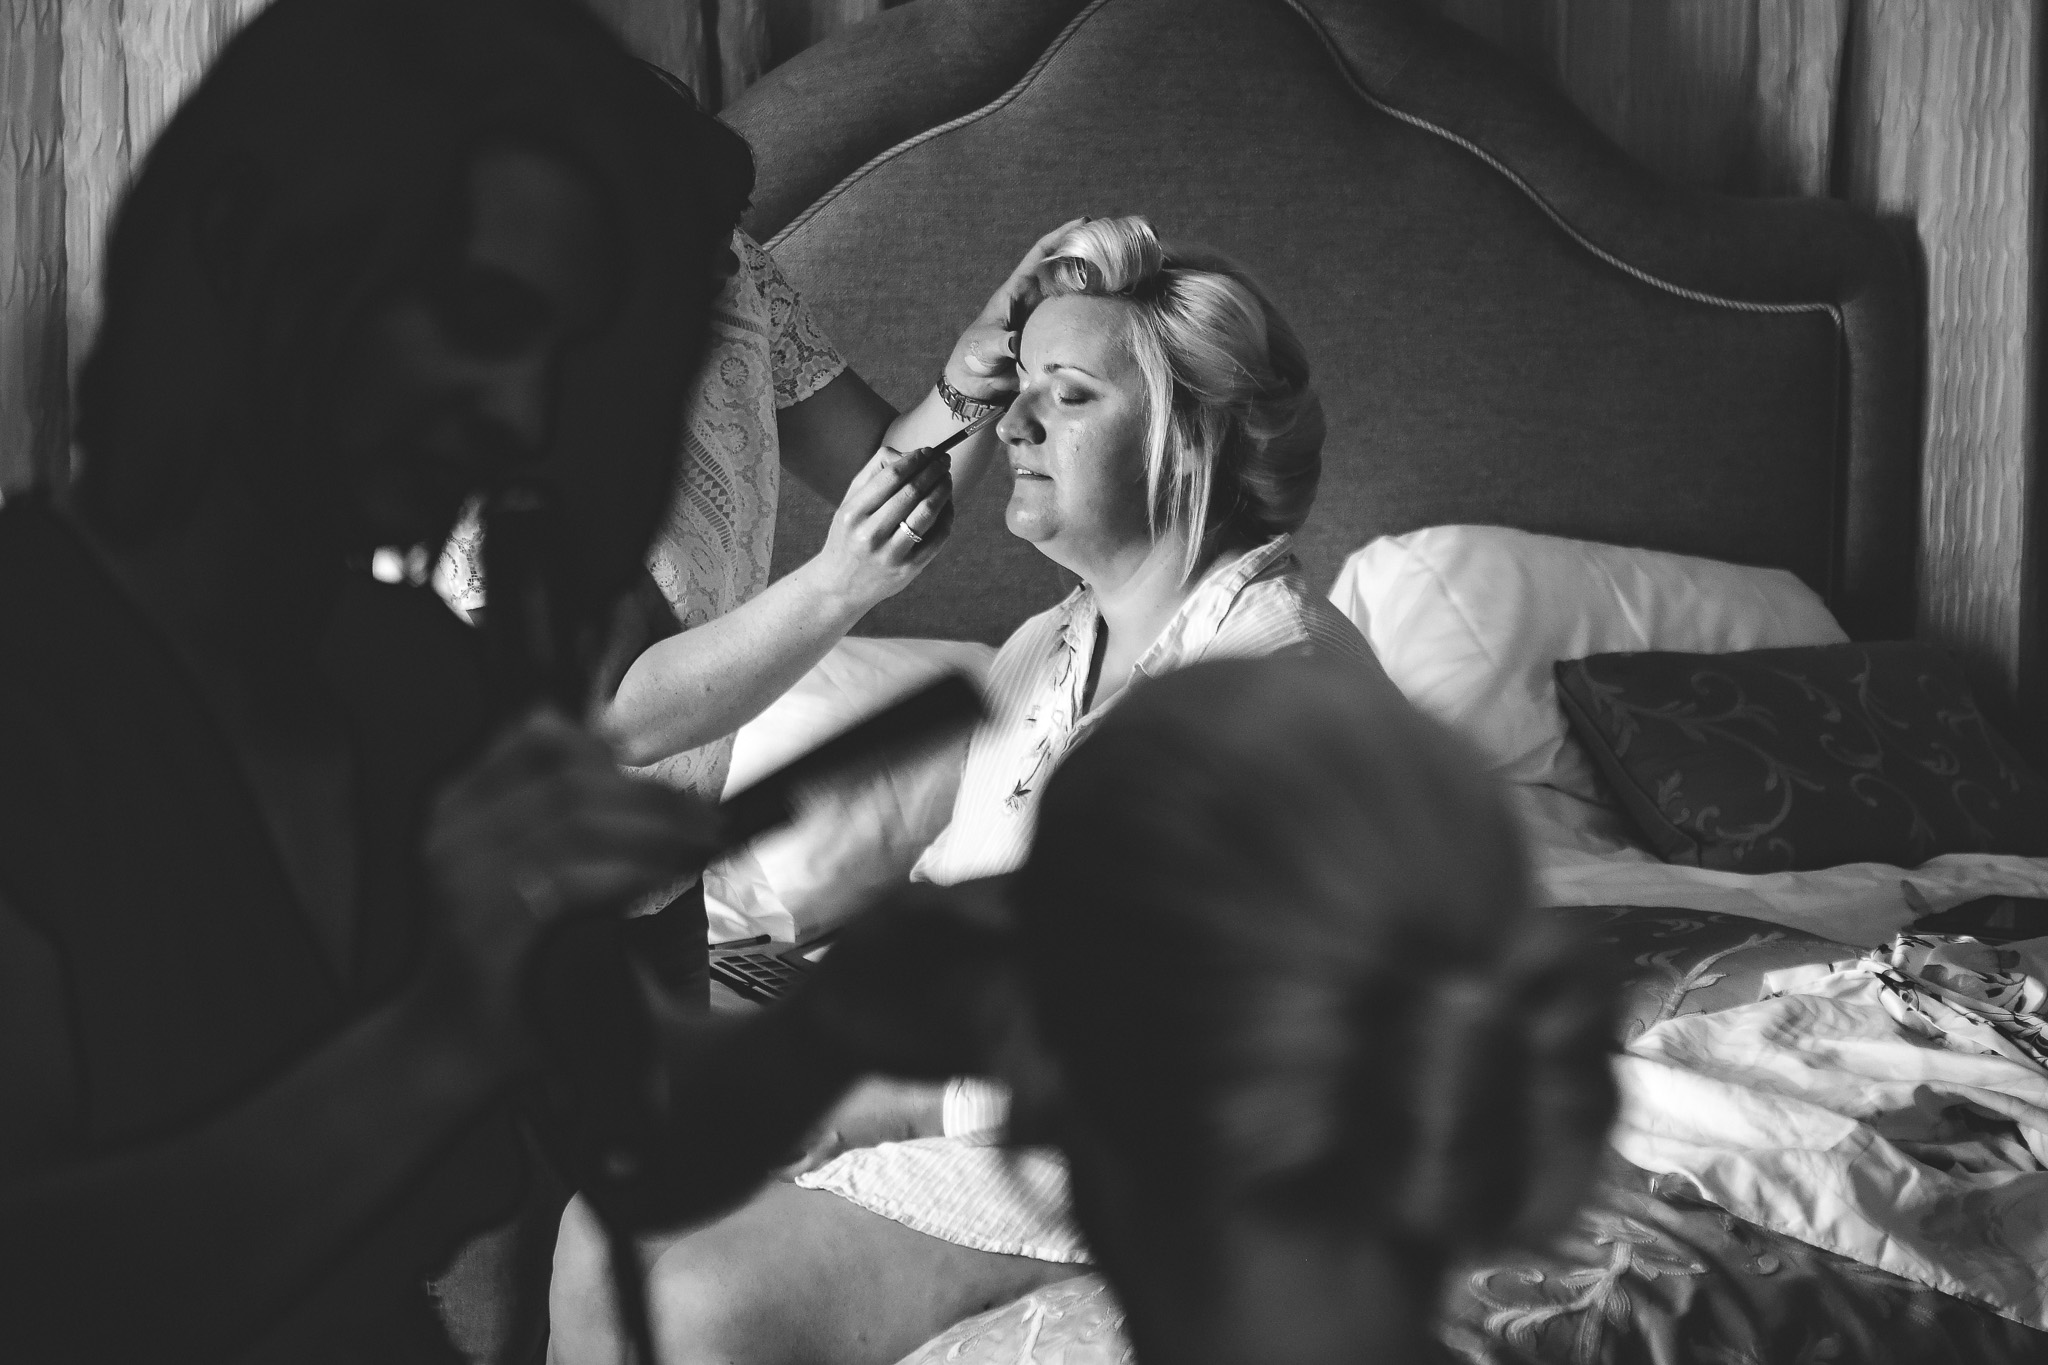 Bride having the final touches before the ceremony